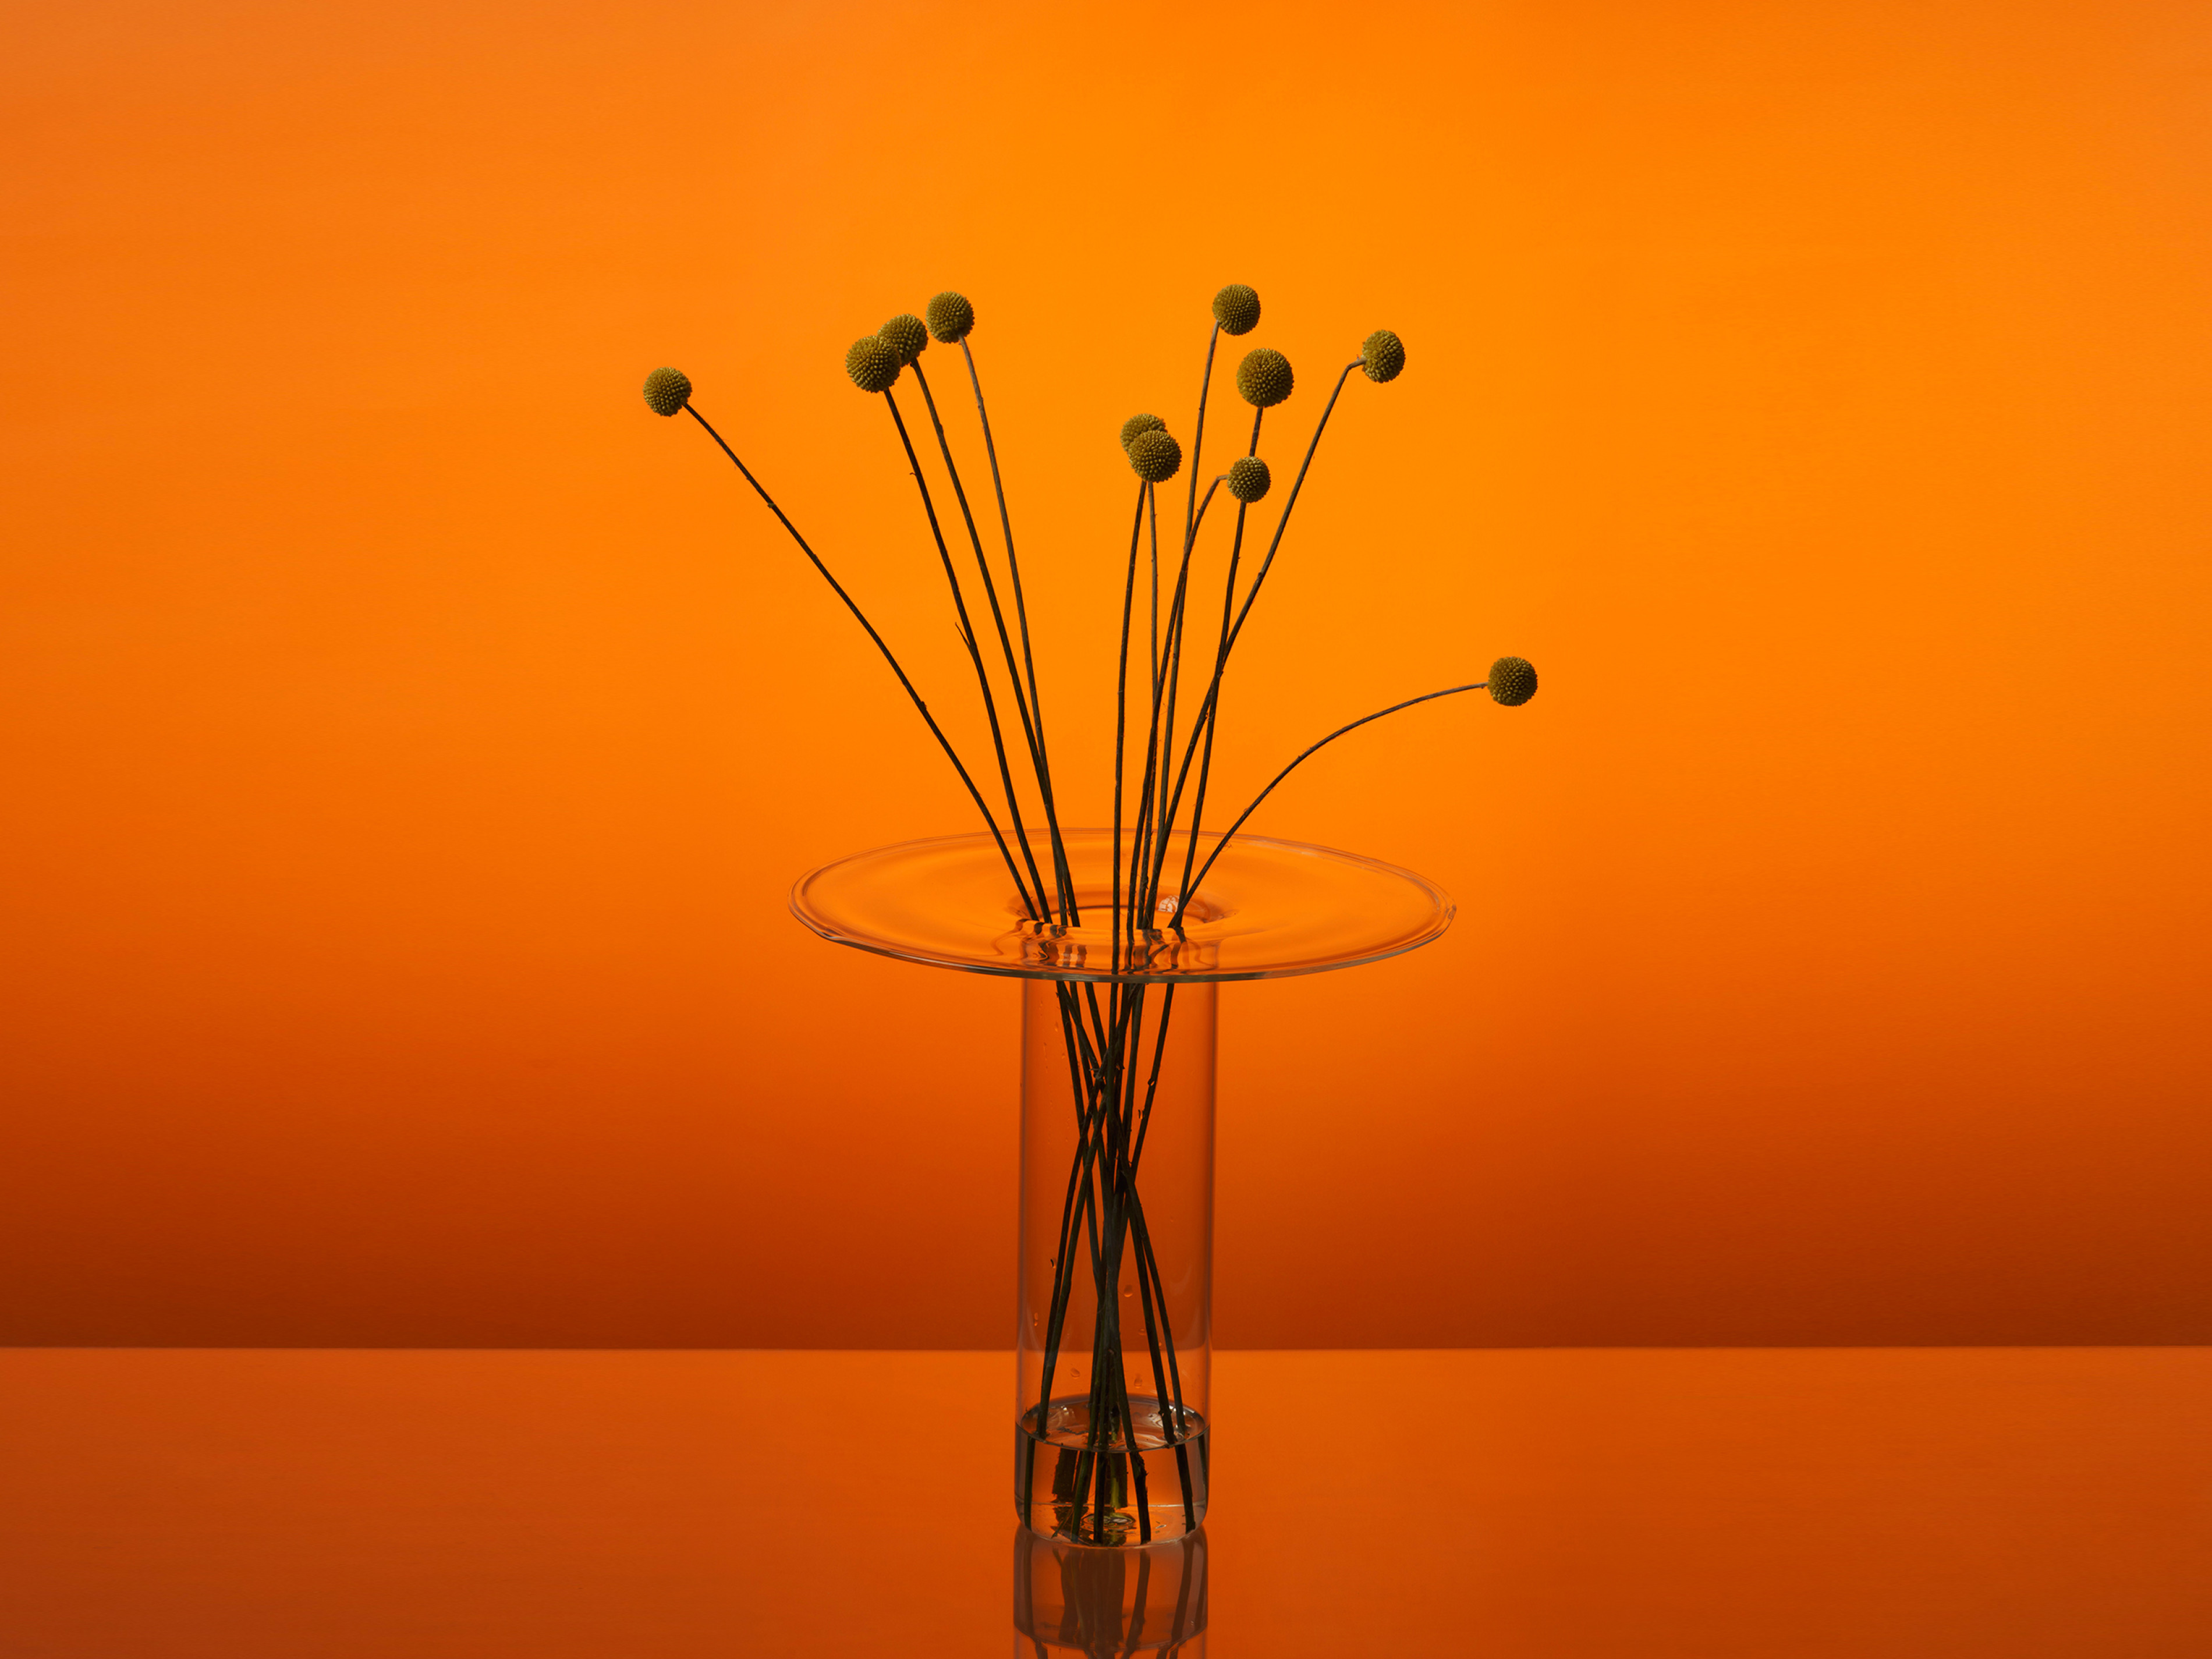 Glass vase with yellow flowers inside on an orange background